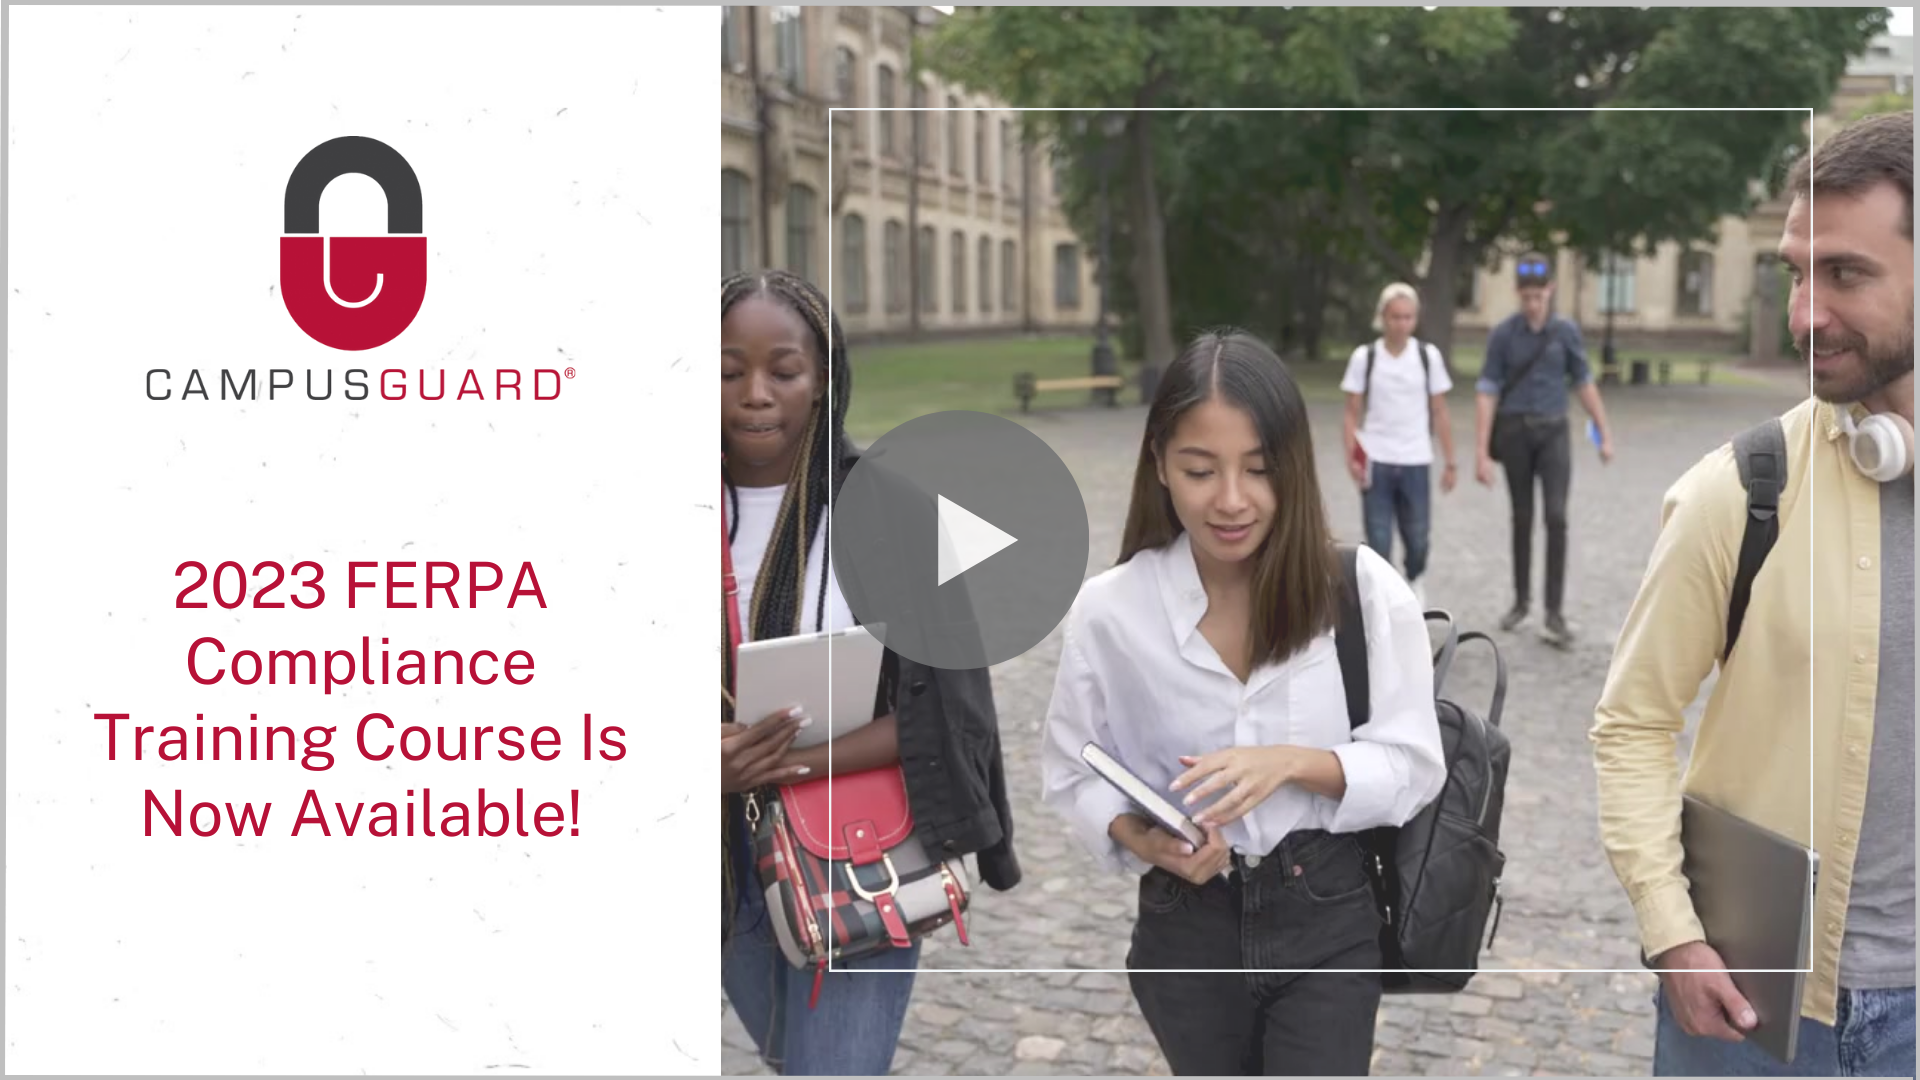 2023 FERPA Compliance Training Course is Now Available